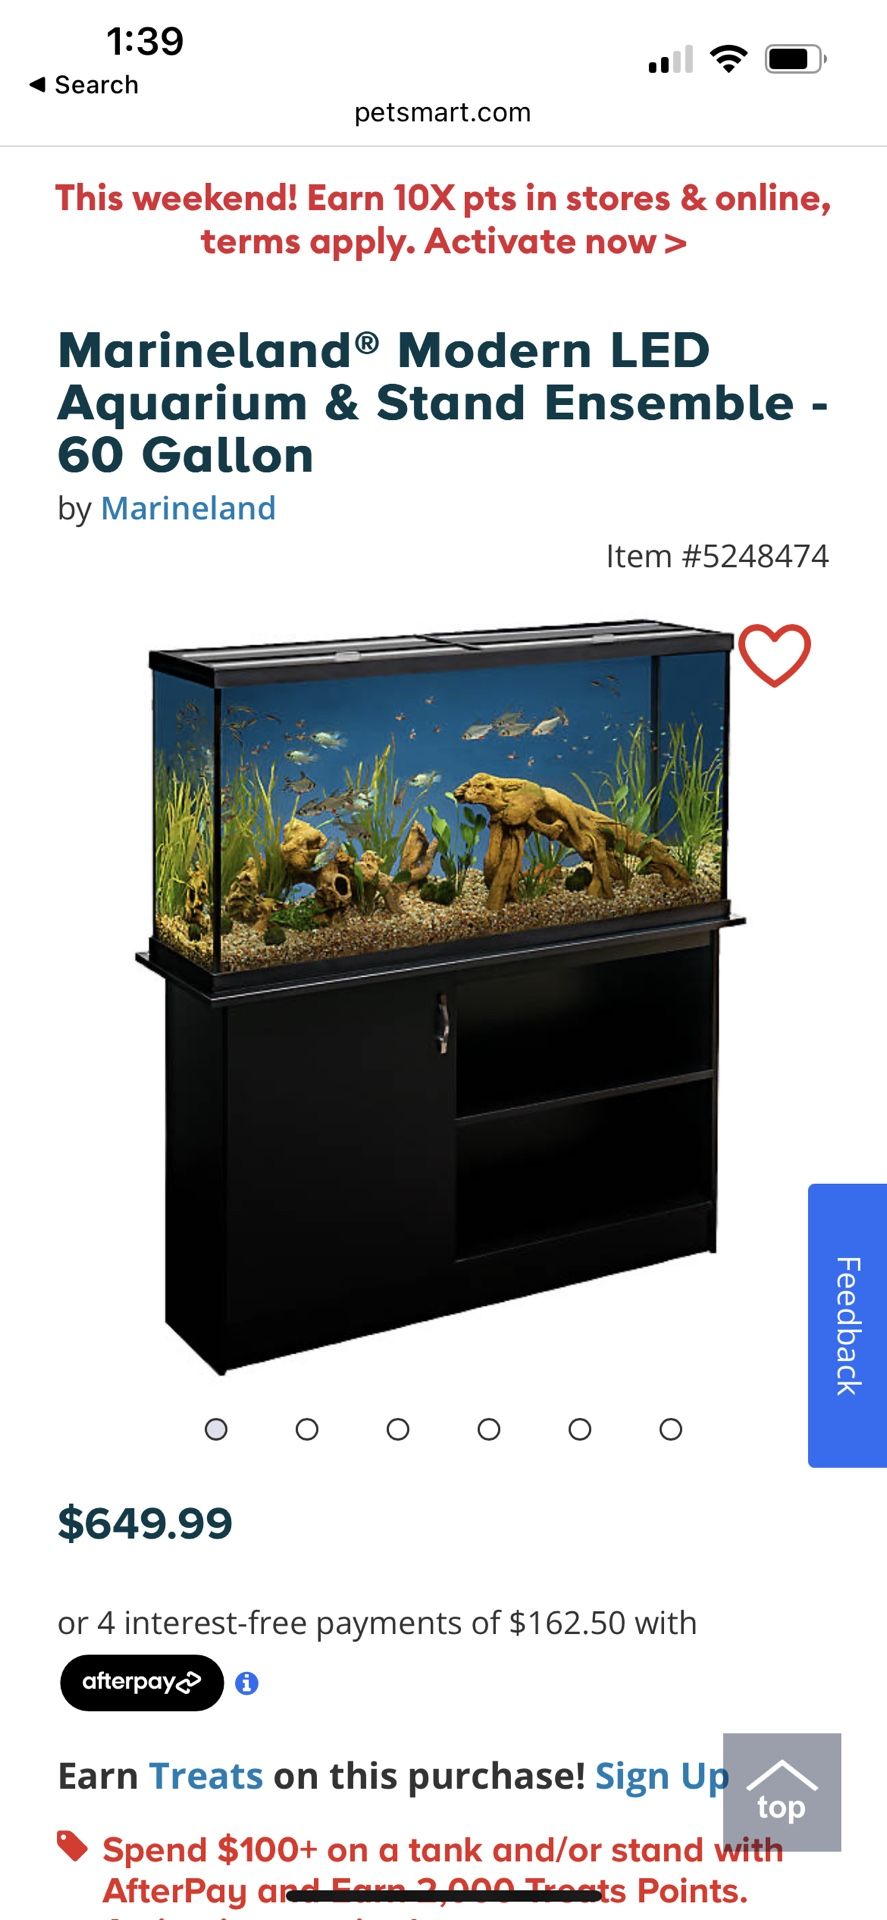 65 Gallon Fish Tank With Cabinets